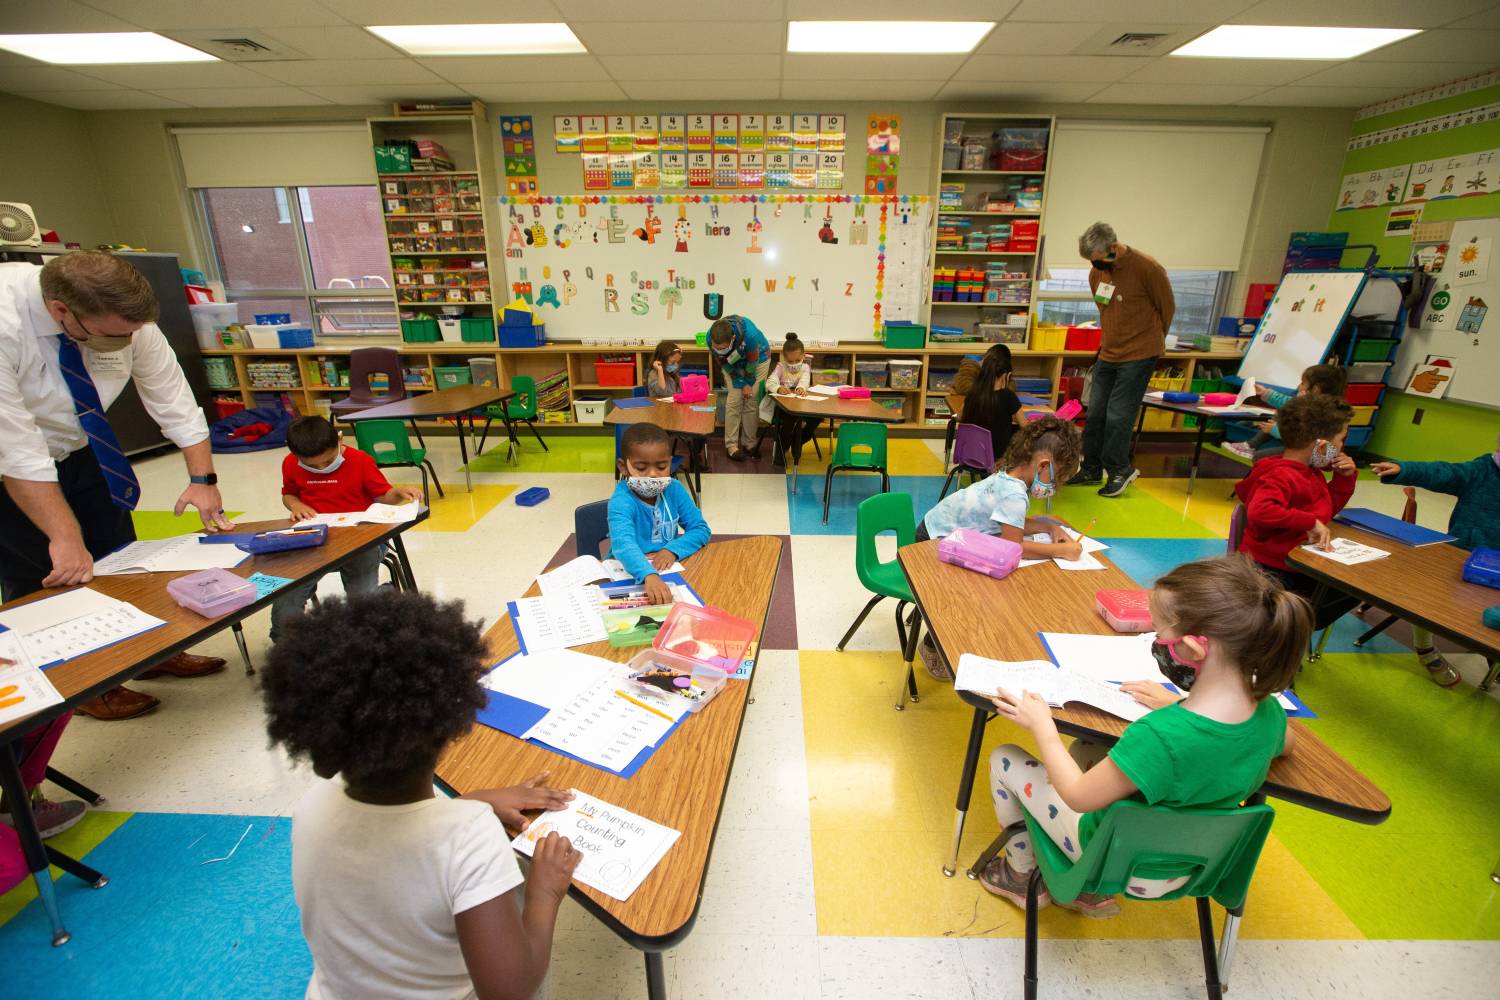 6 Advantages of Virtual Classrooms and How Large Districts Can Benefit